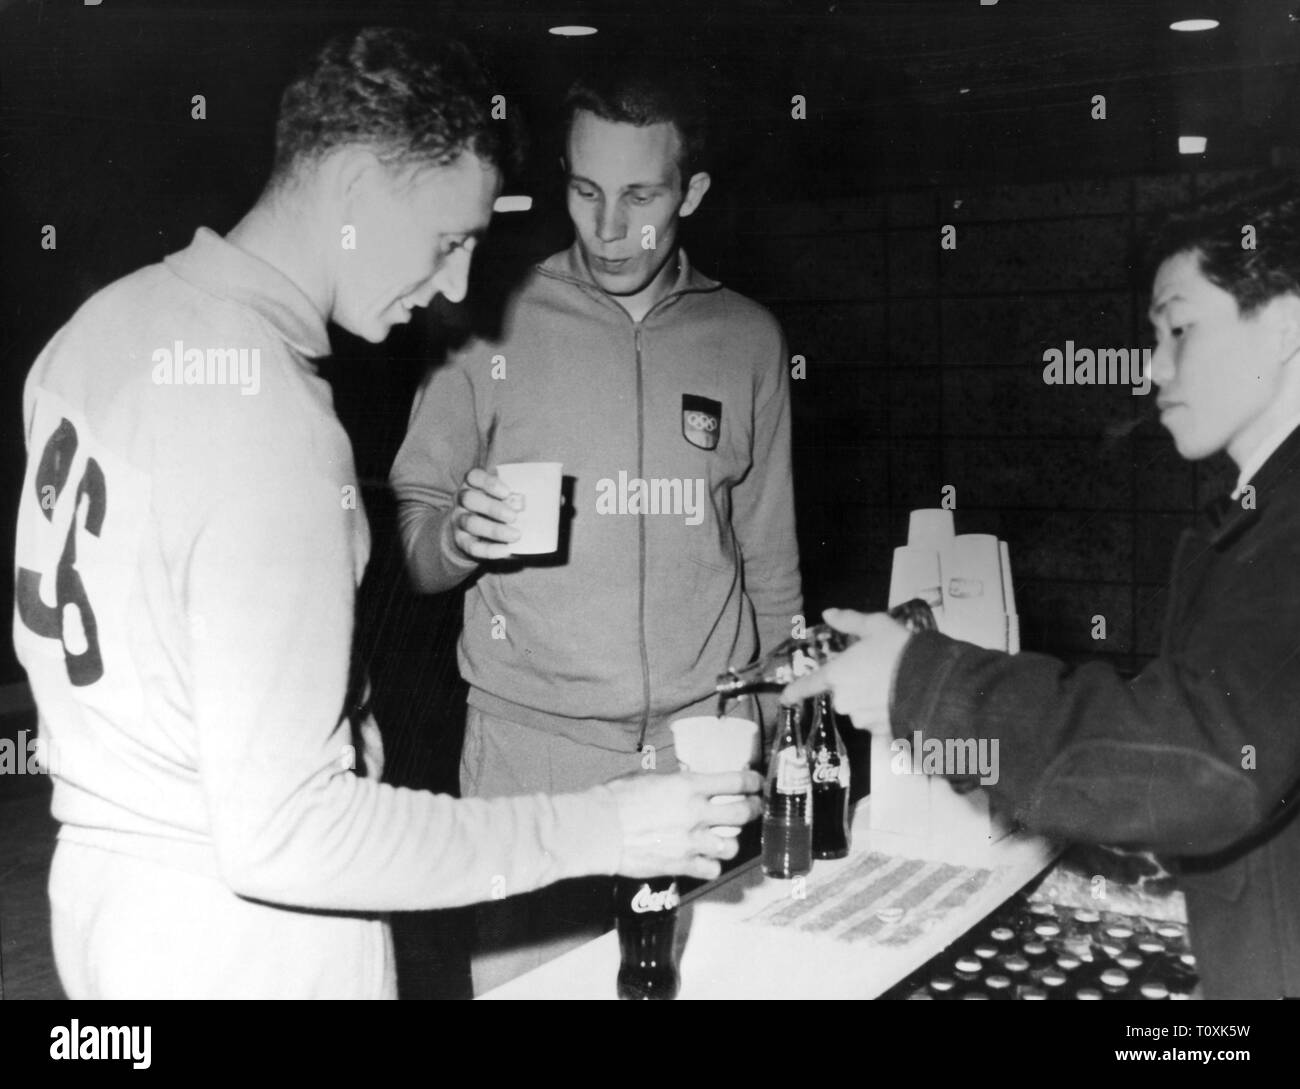 Sport, Giochi Olimpici, Tokyo 10.10. - 24.10.1964, Additional-Rights-Clearance-Info-Not-Available Foto Stock